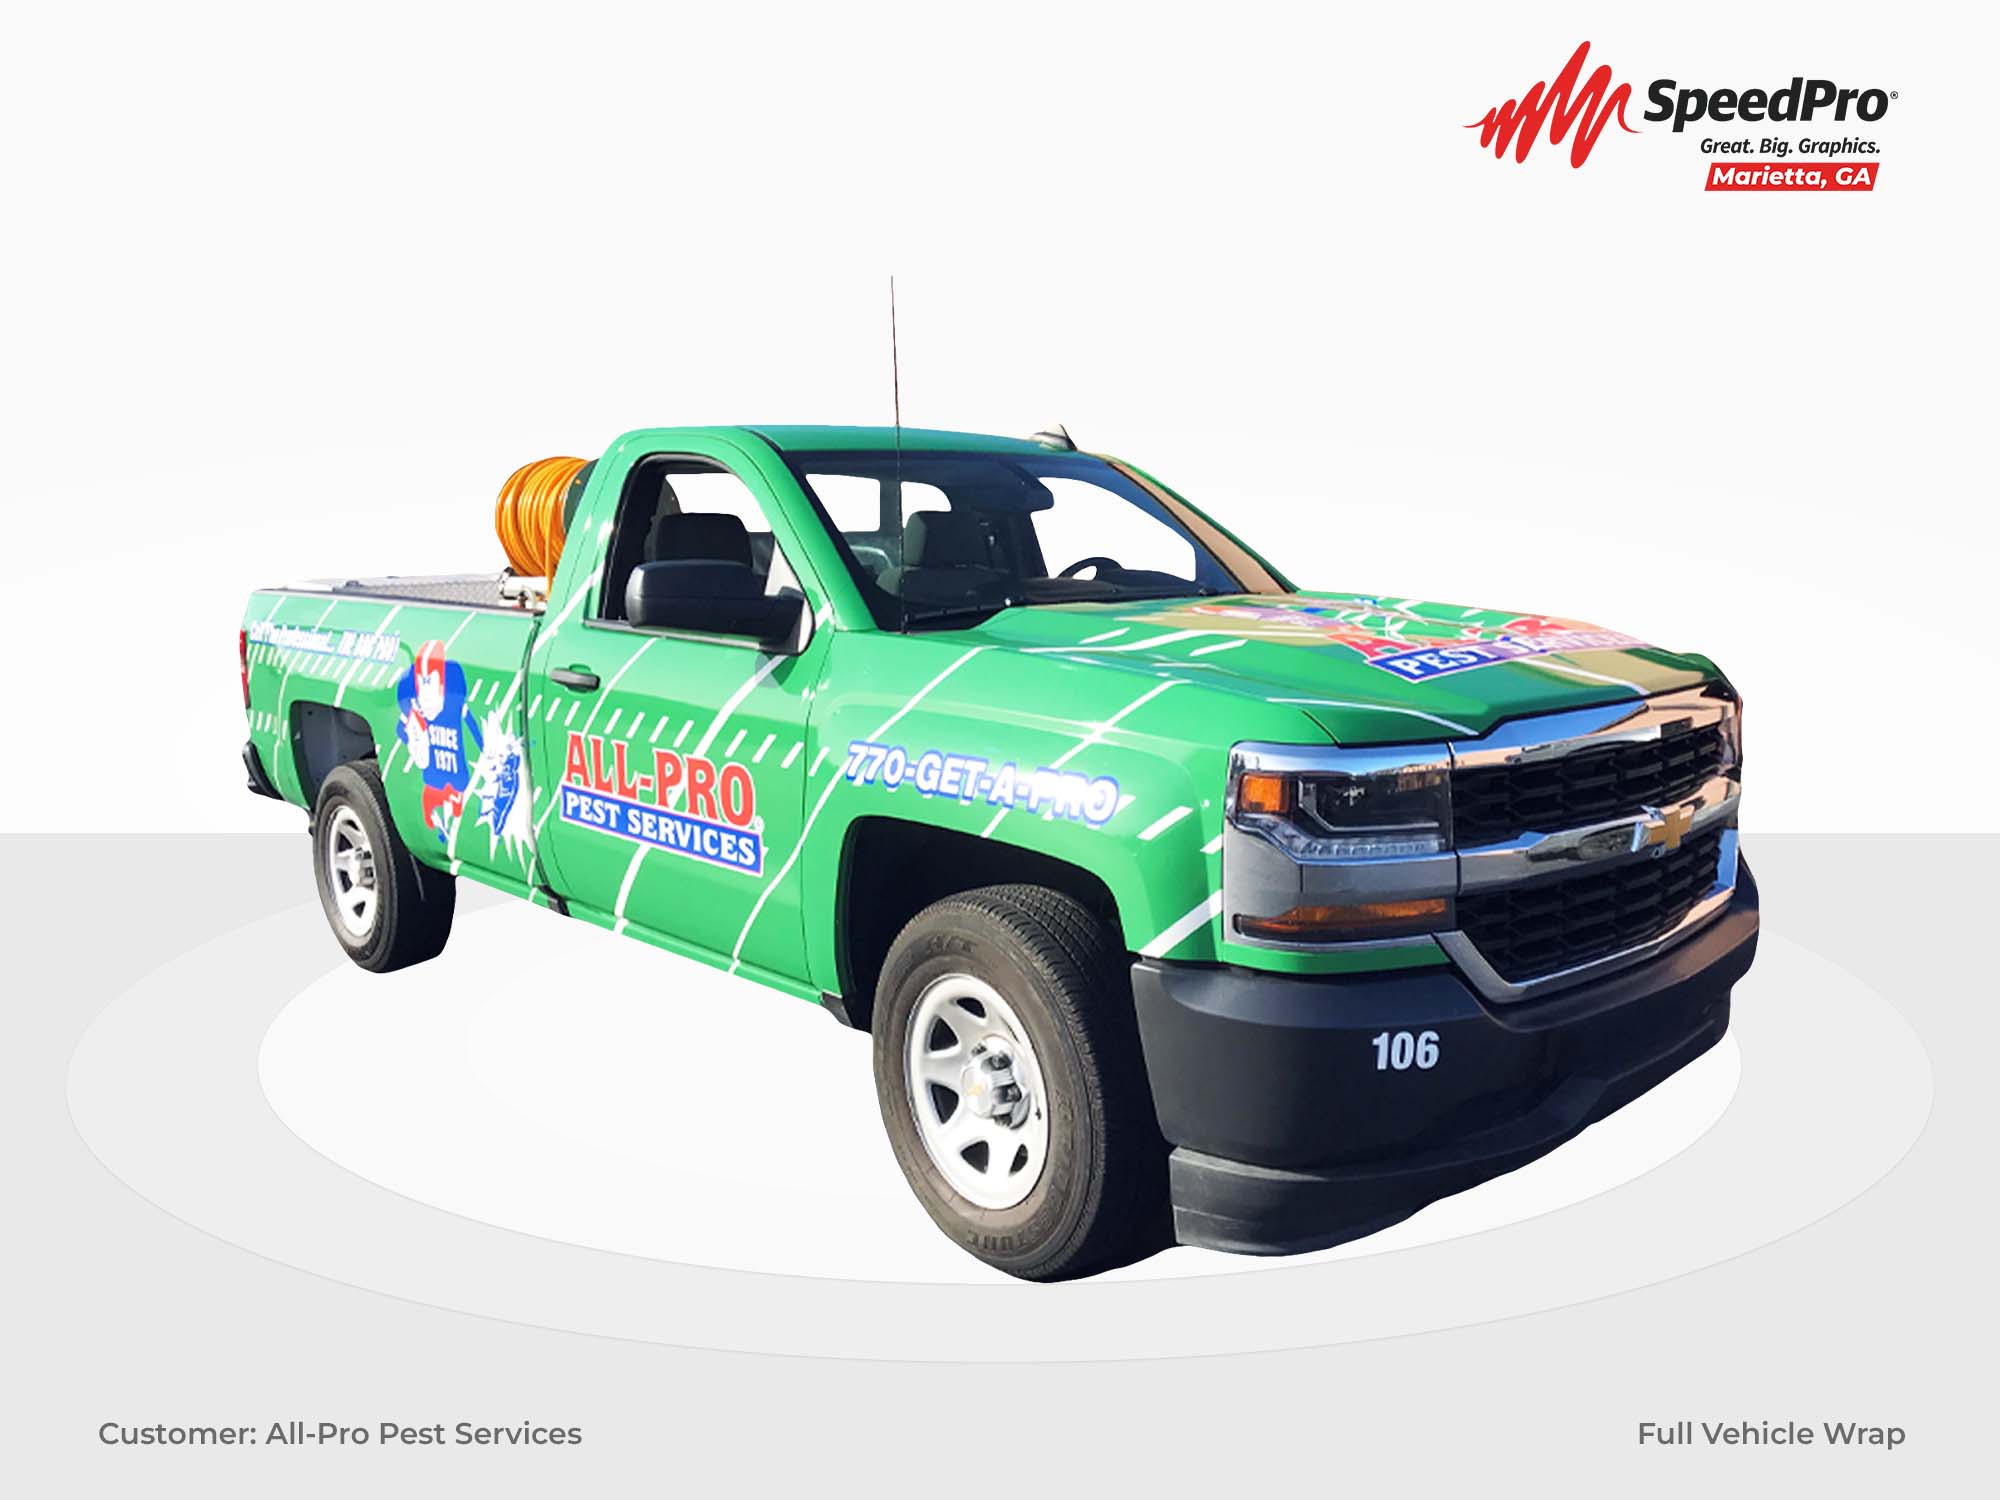 All-Pro Pest Services full vehicle wrap